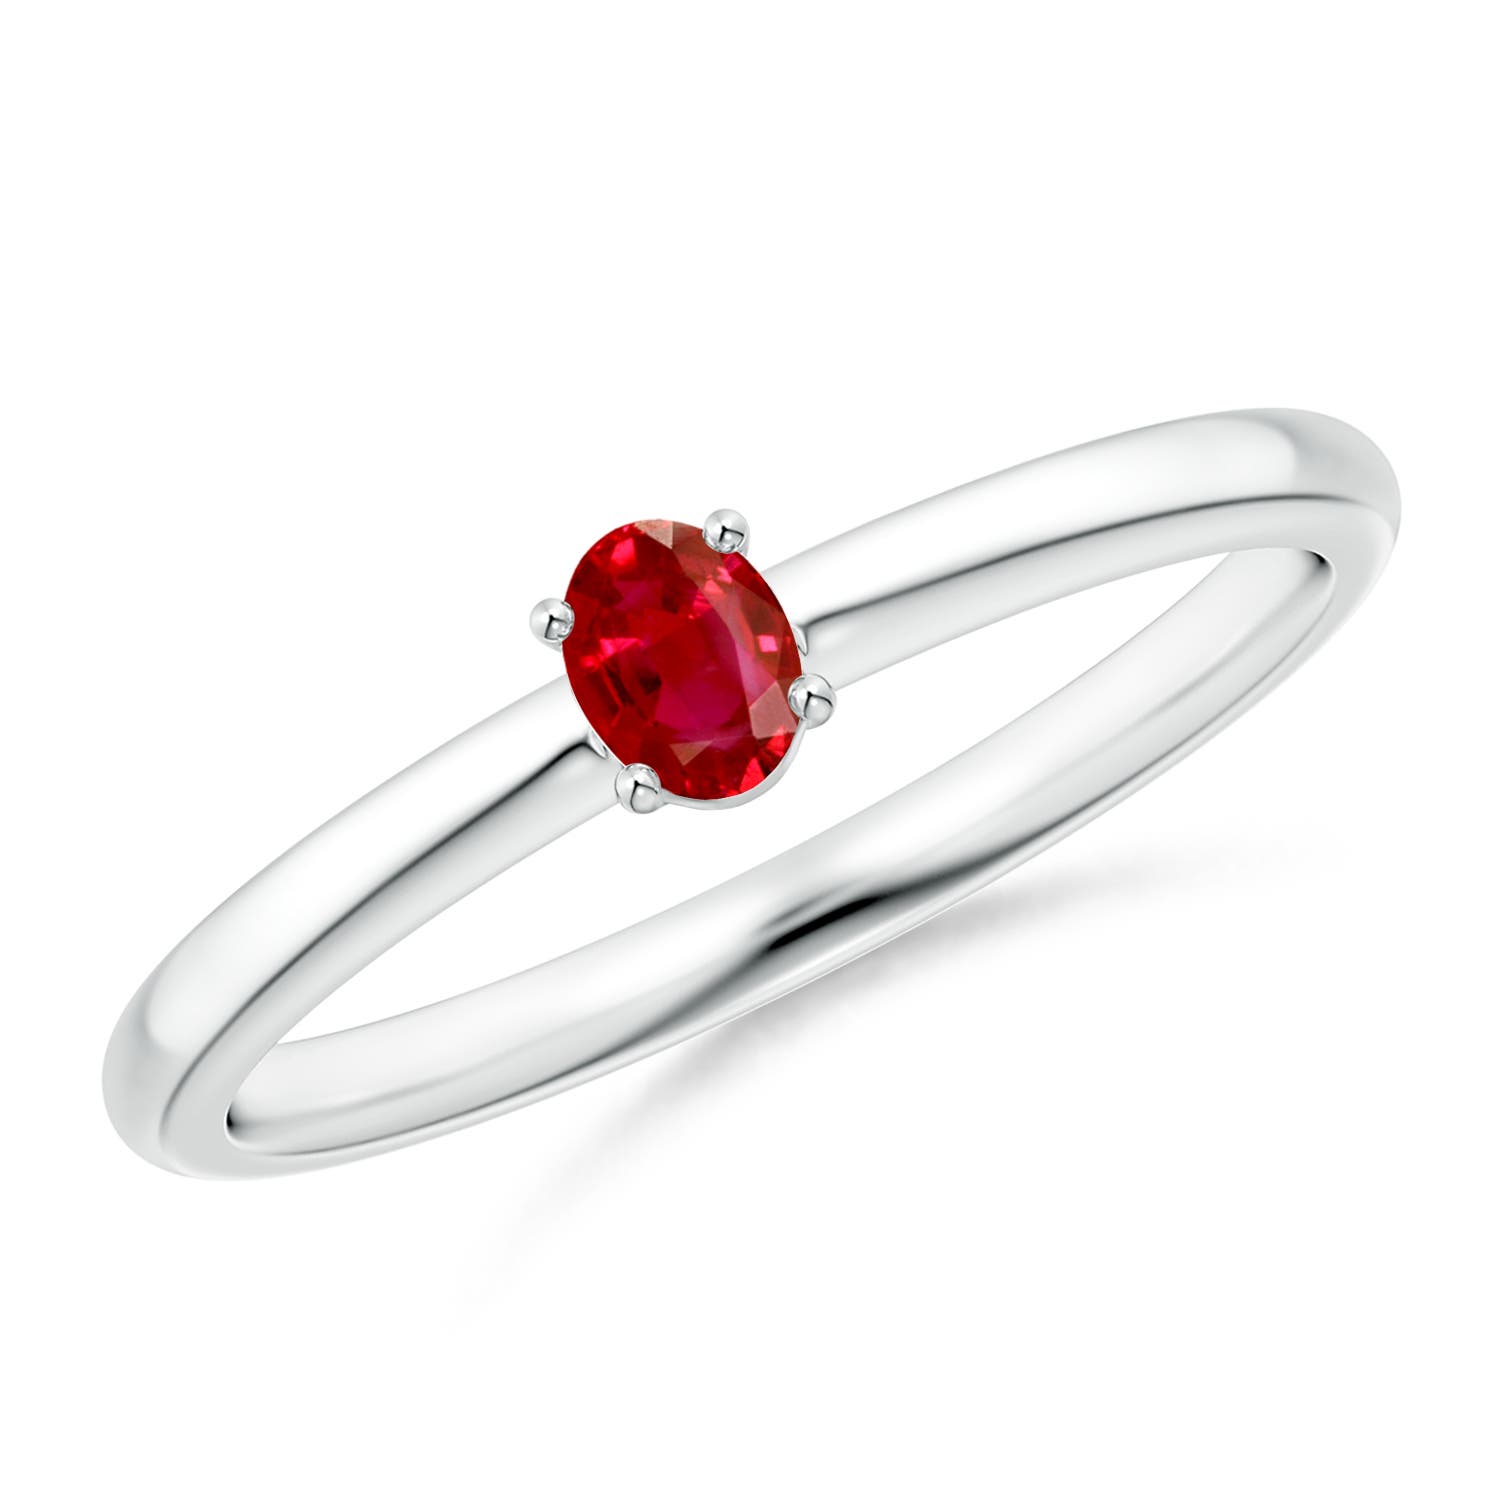 AAA - Ruby / 0.2 CT / 14 KT White Gold